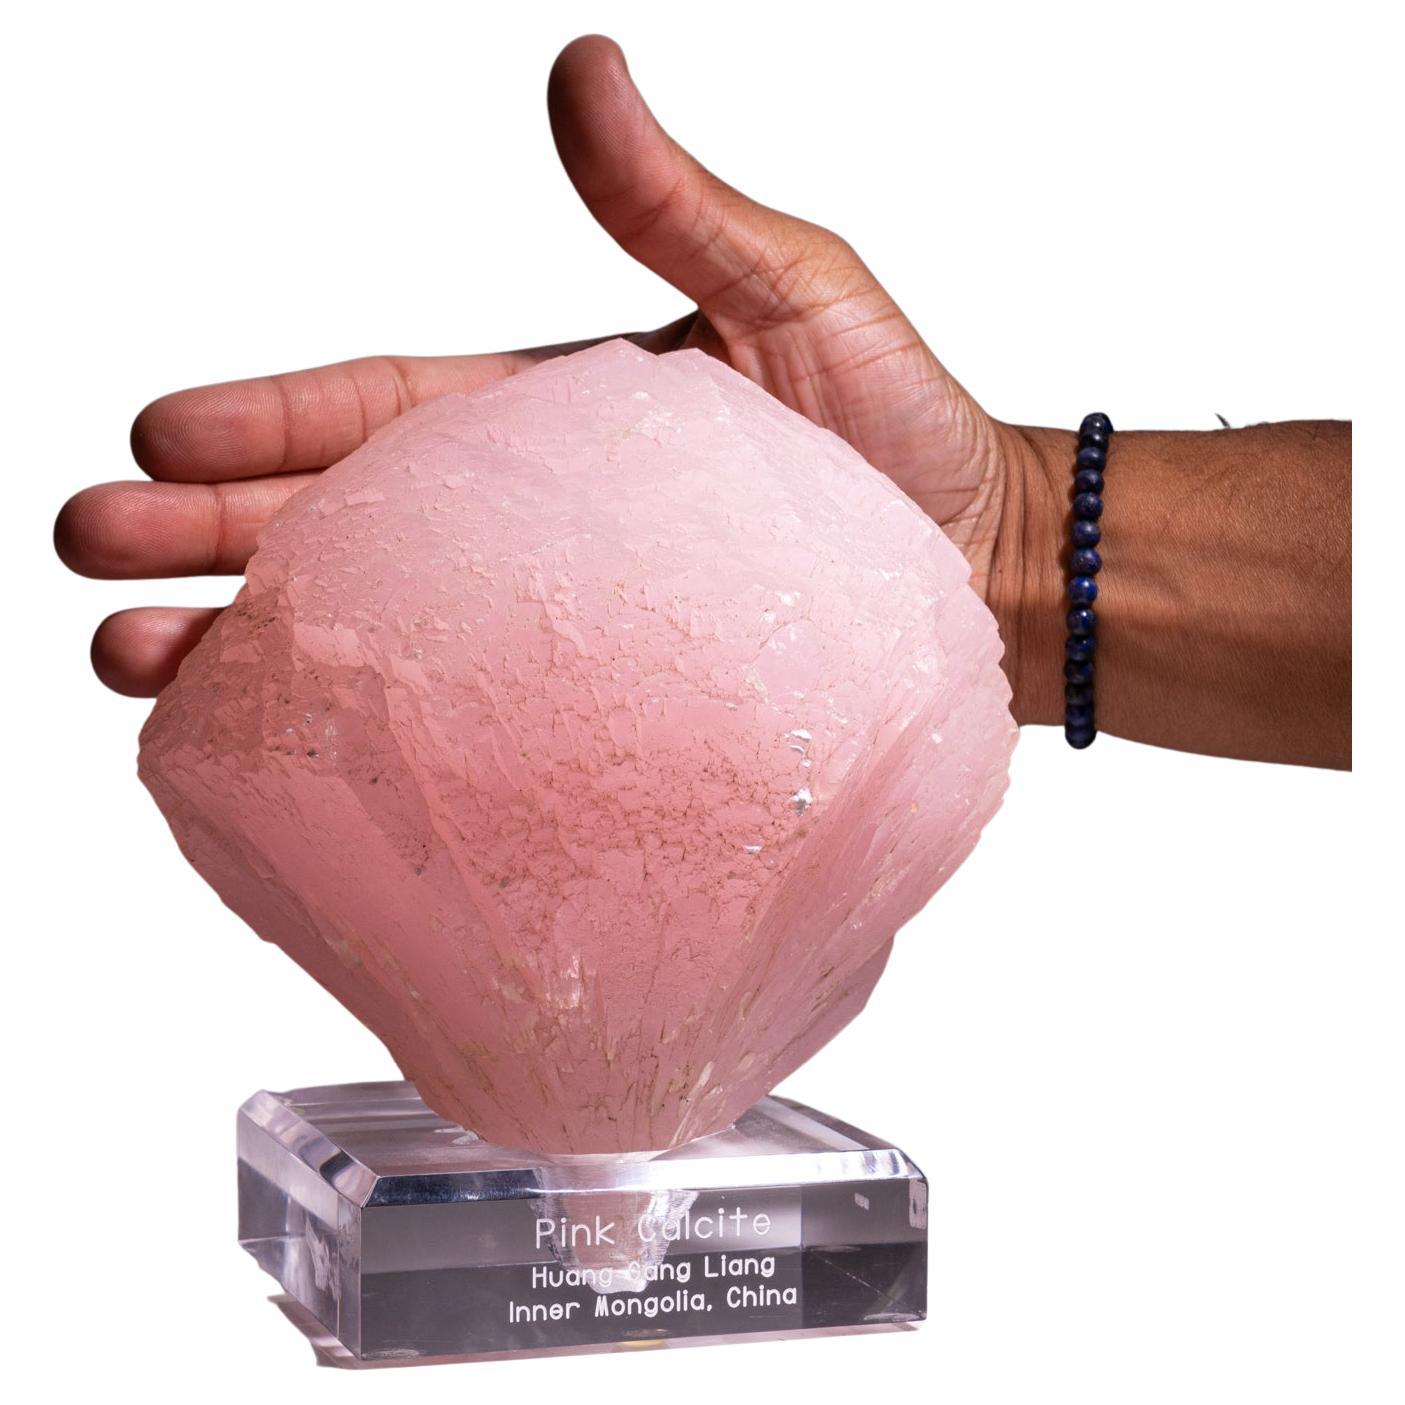 From Huanggang Mine, Kèshíkèténg Qí, Chifeng, Inner Mongolia, China

Pink mangano calcite flower. The pink color of the calcite is caused by manganese impurities and these are frequently labeled as manganocalcite, an obsolete mineral name.

Weight: